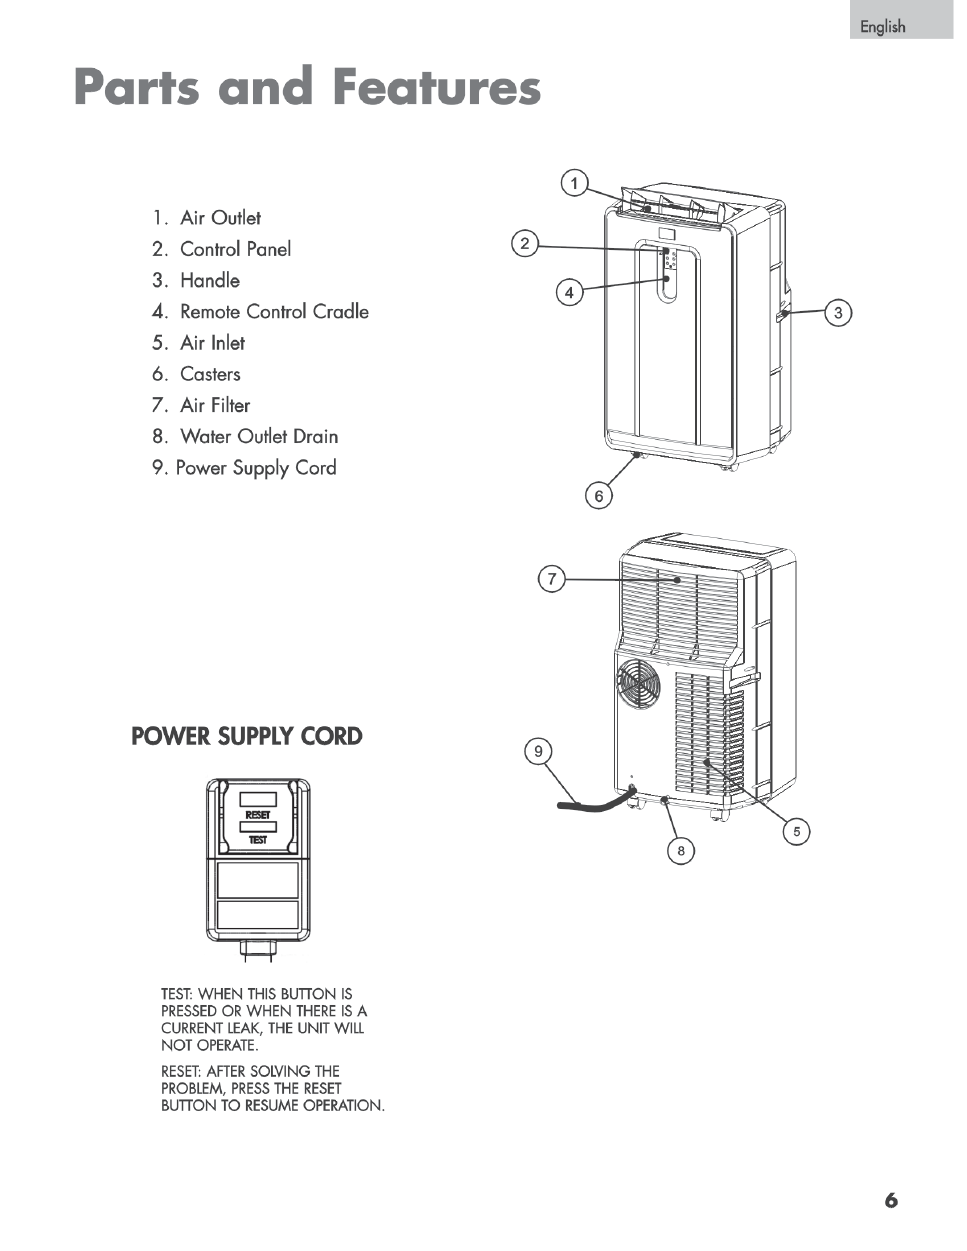 Commercial Cool Portable Air Conditioner User Manual ...